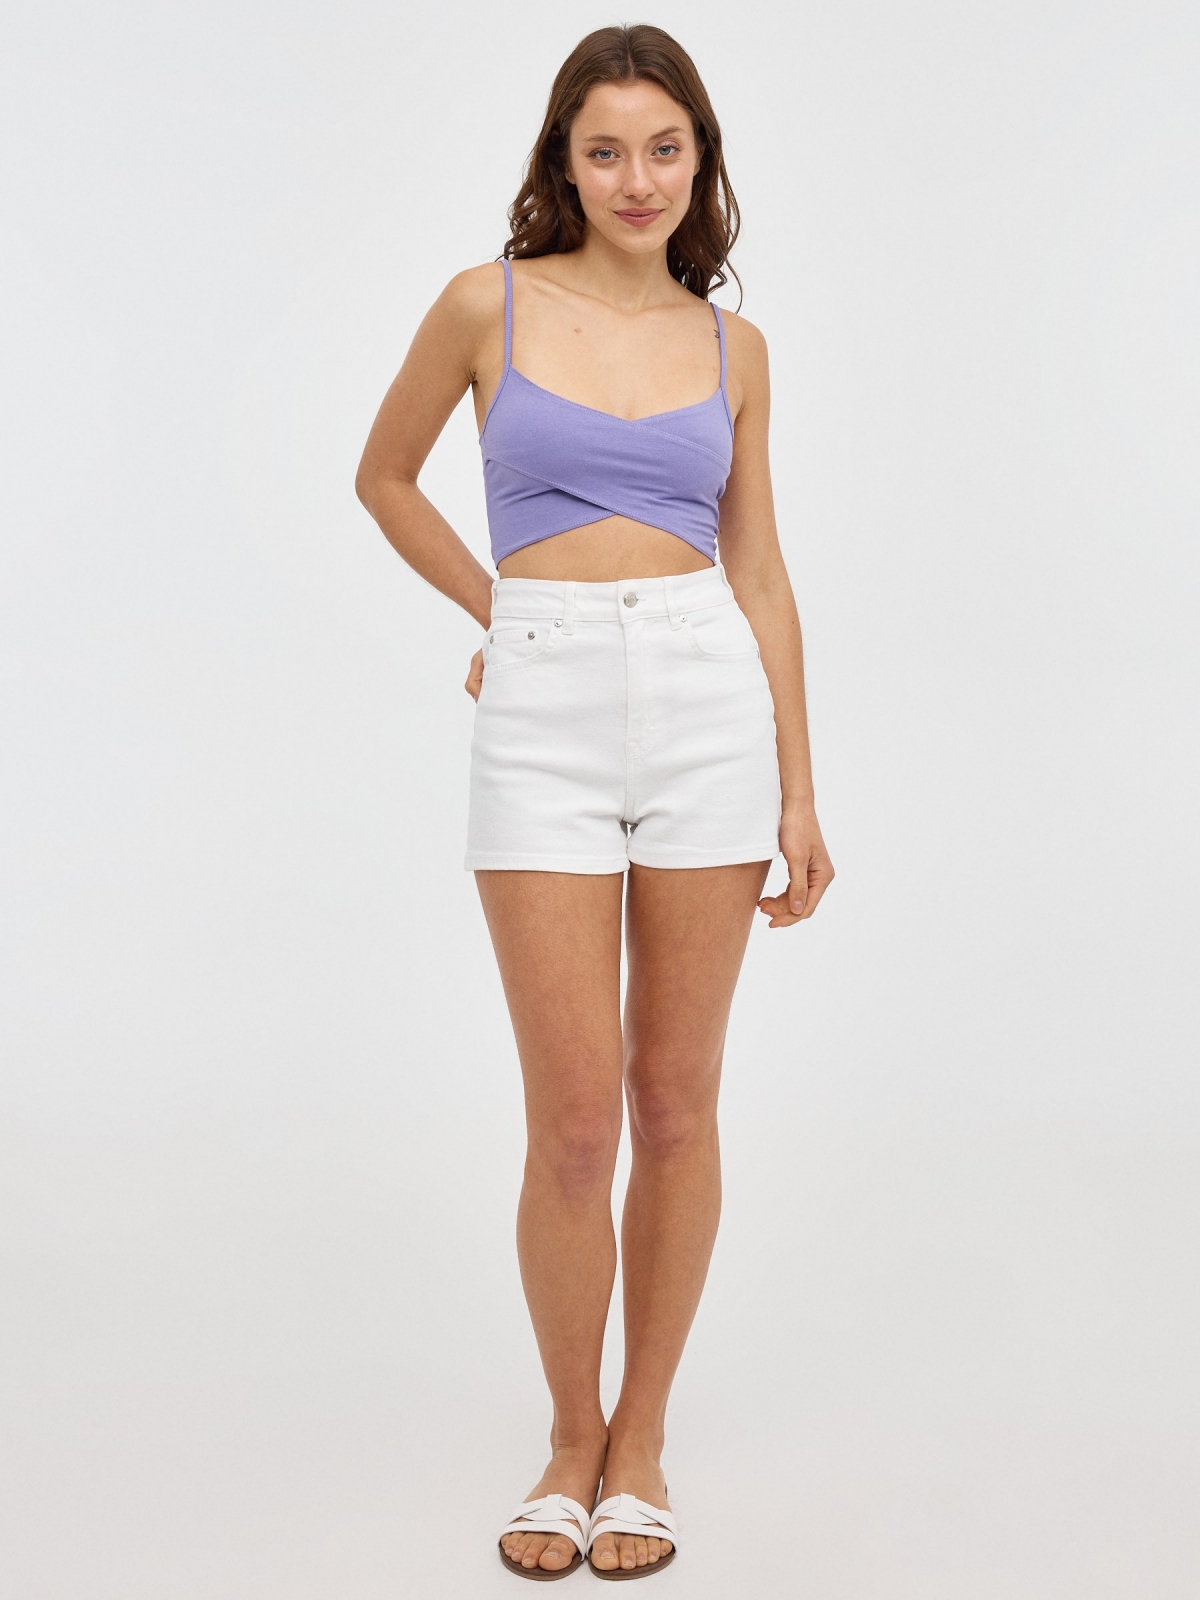 Slim fit crossover crop top lilac front view